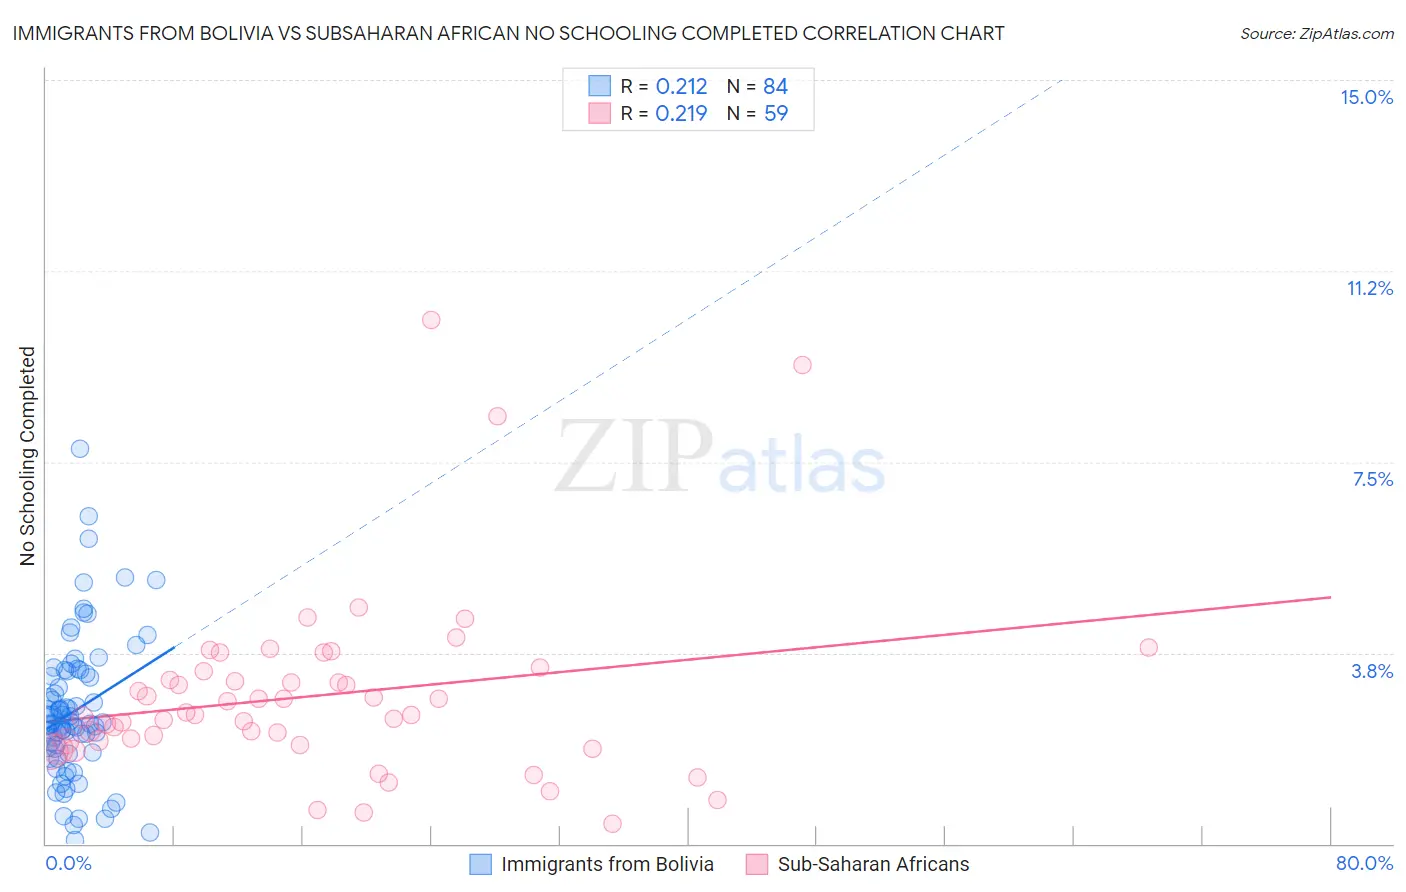 Immigrants from Bolivia vs Subsaharan African No Schooling Completed